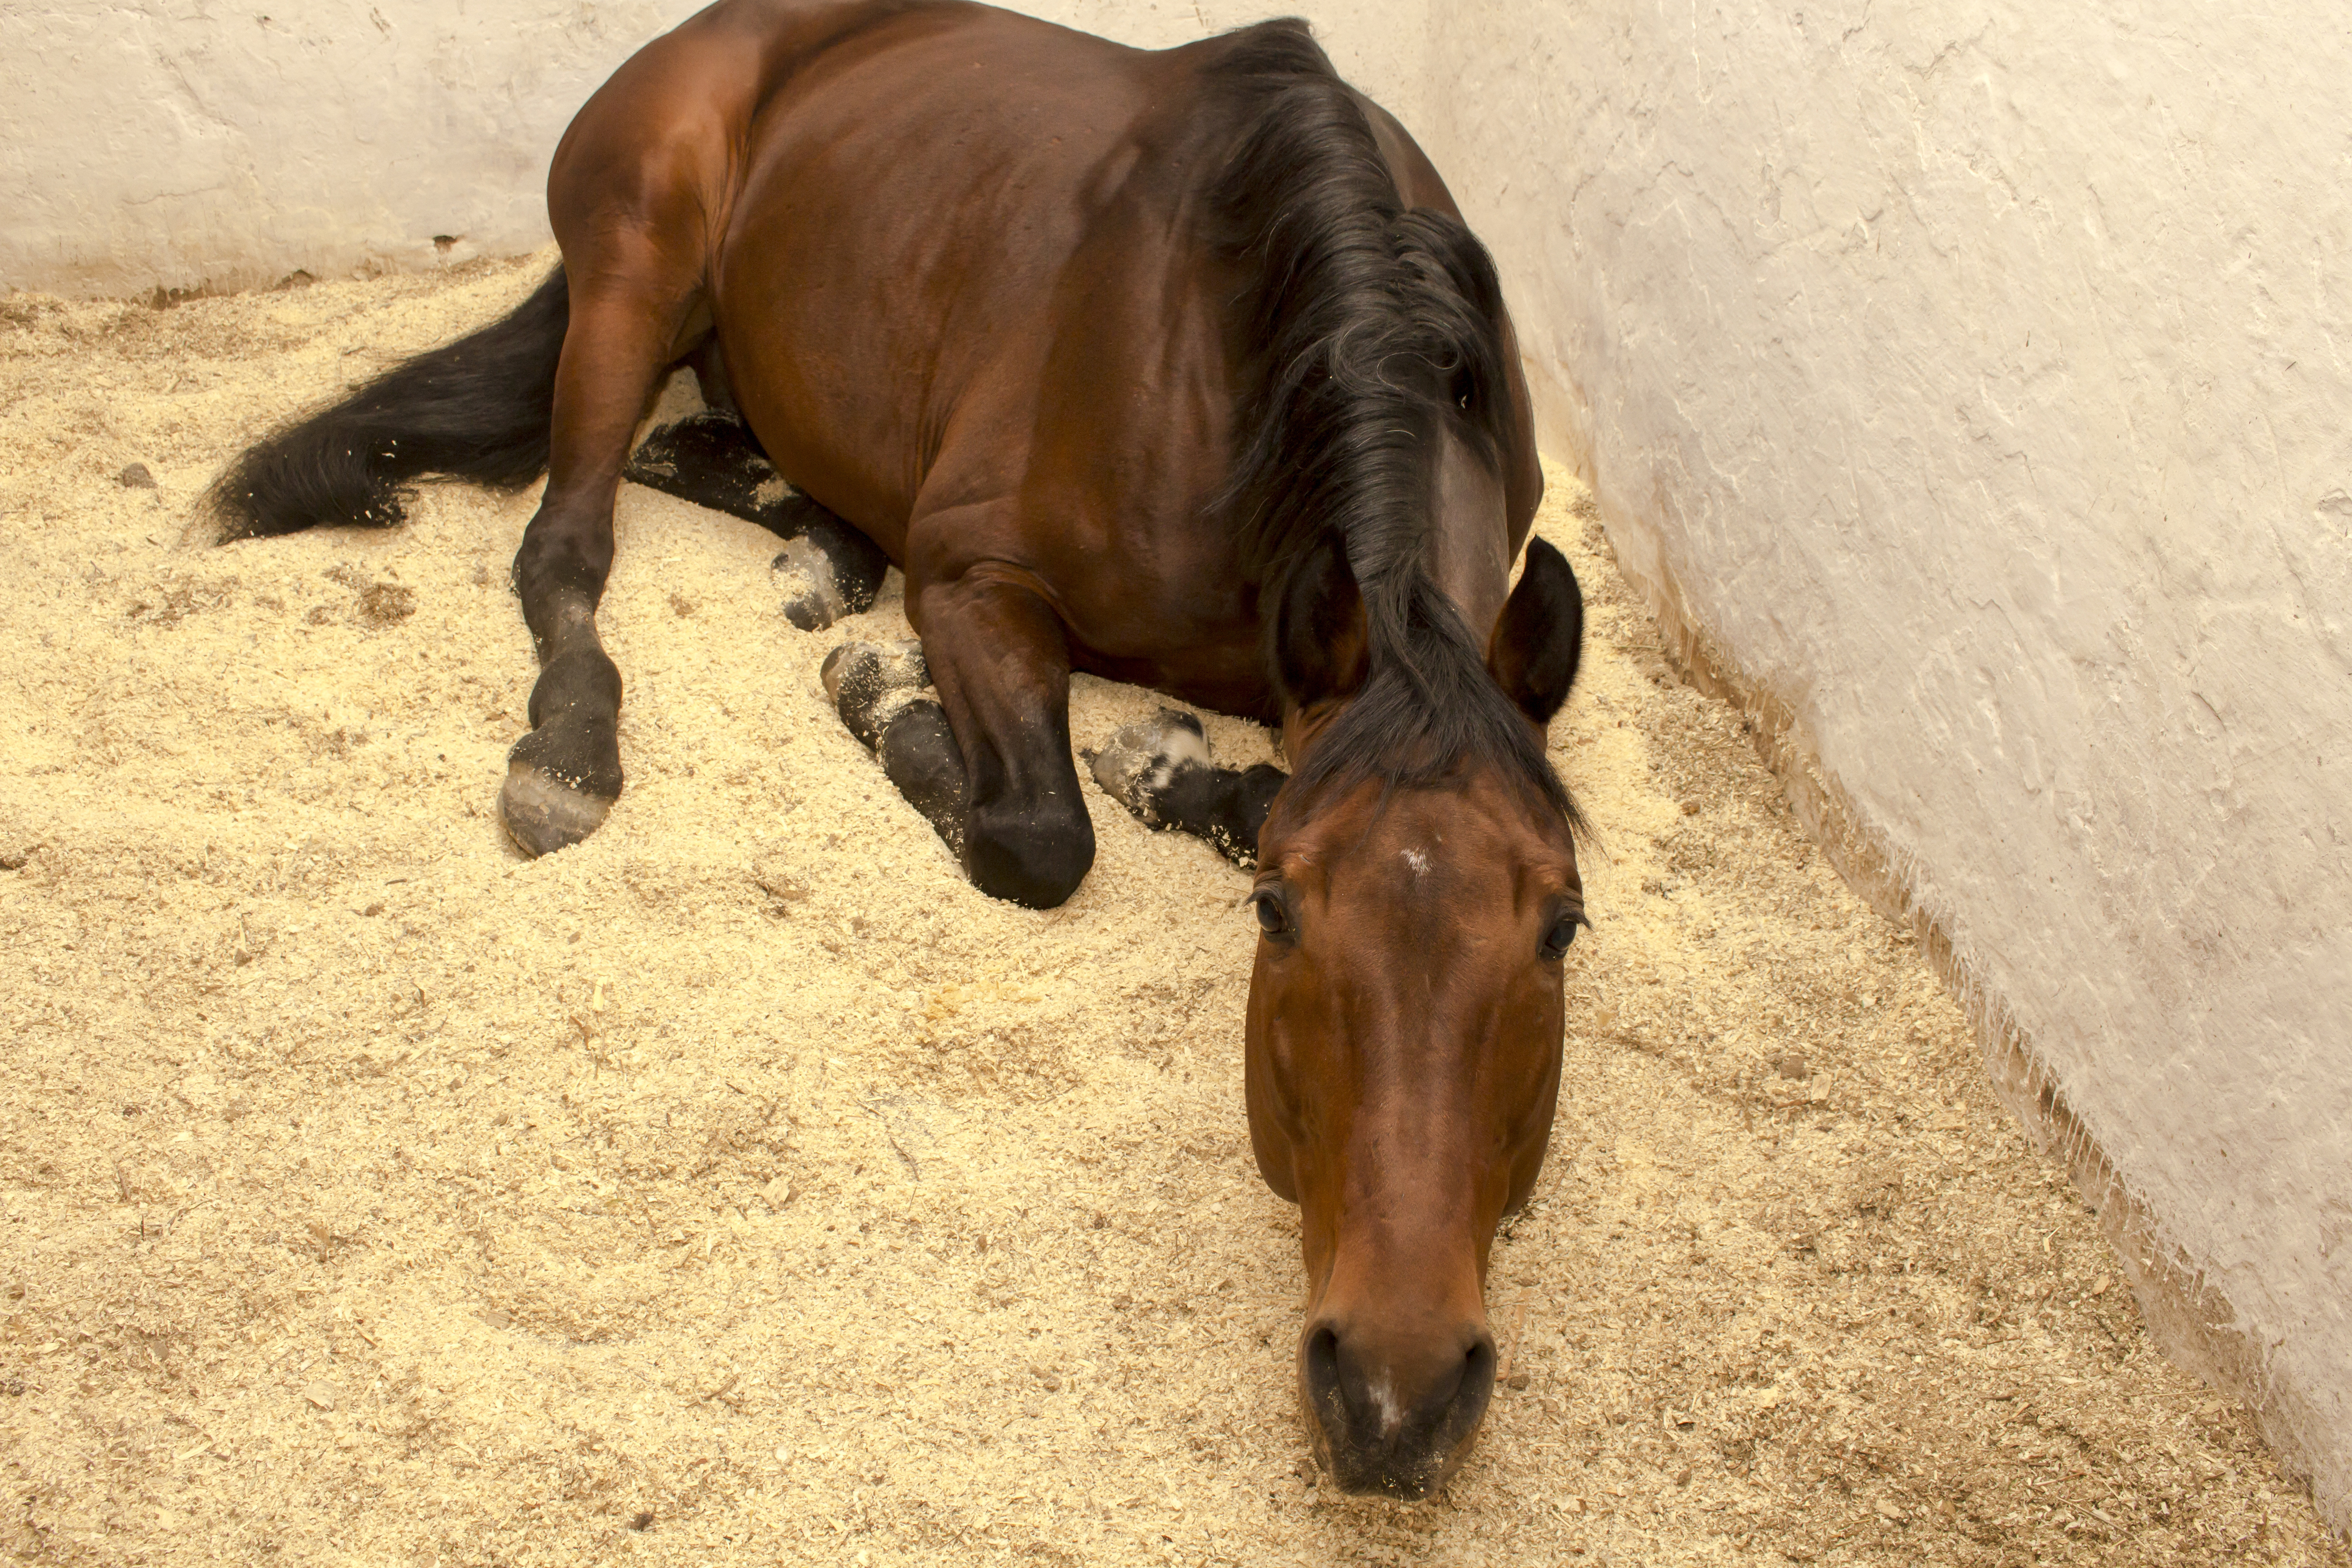 A horse lying down in a stall with fresh shavings